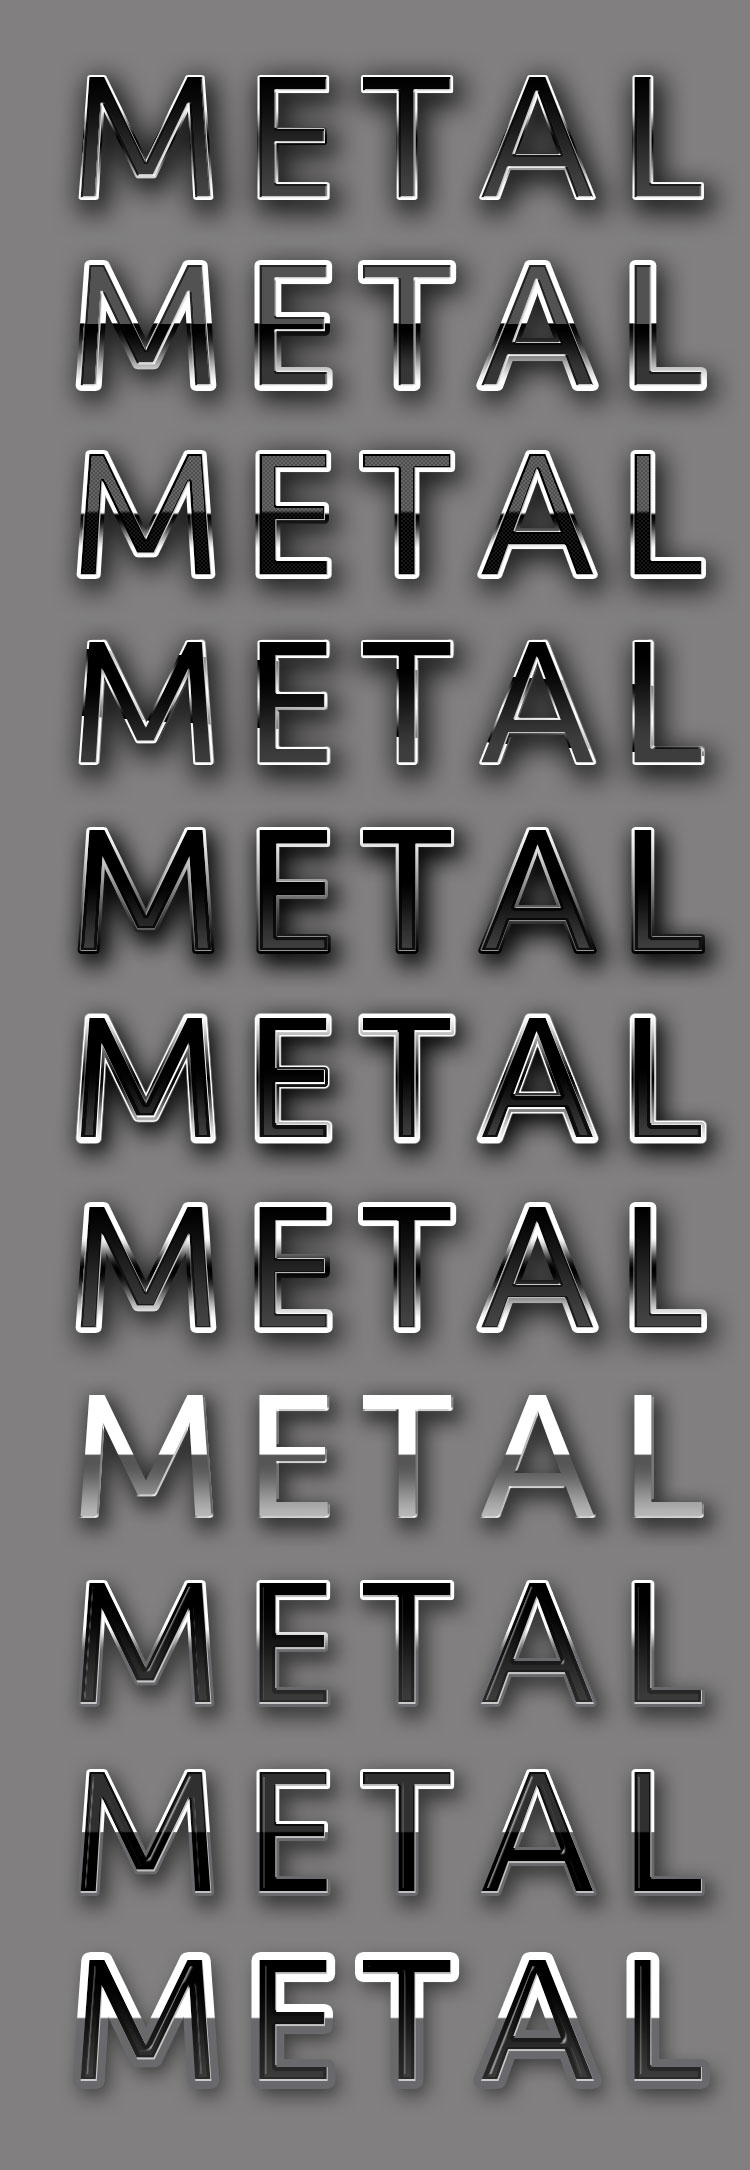 Metal PS Photoshop Font Style